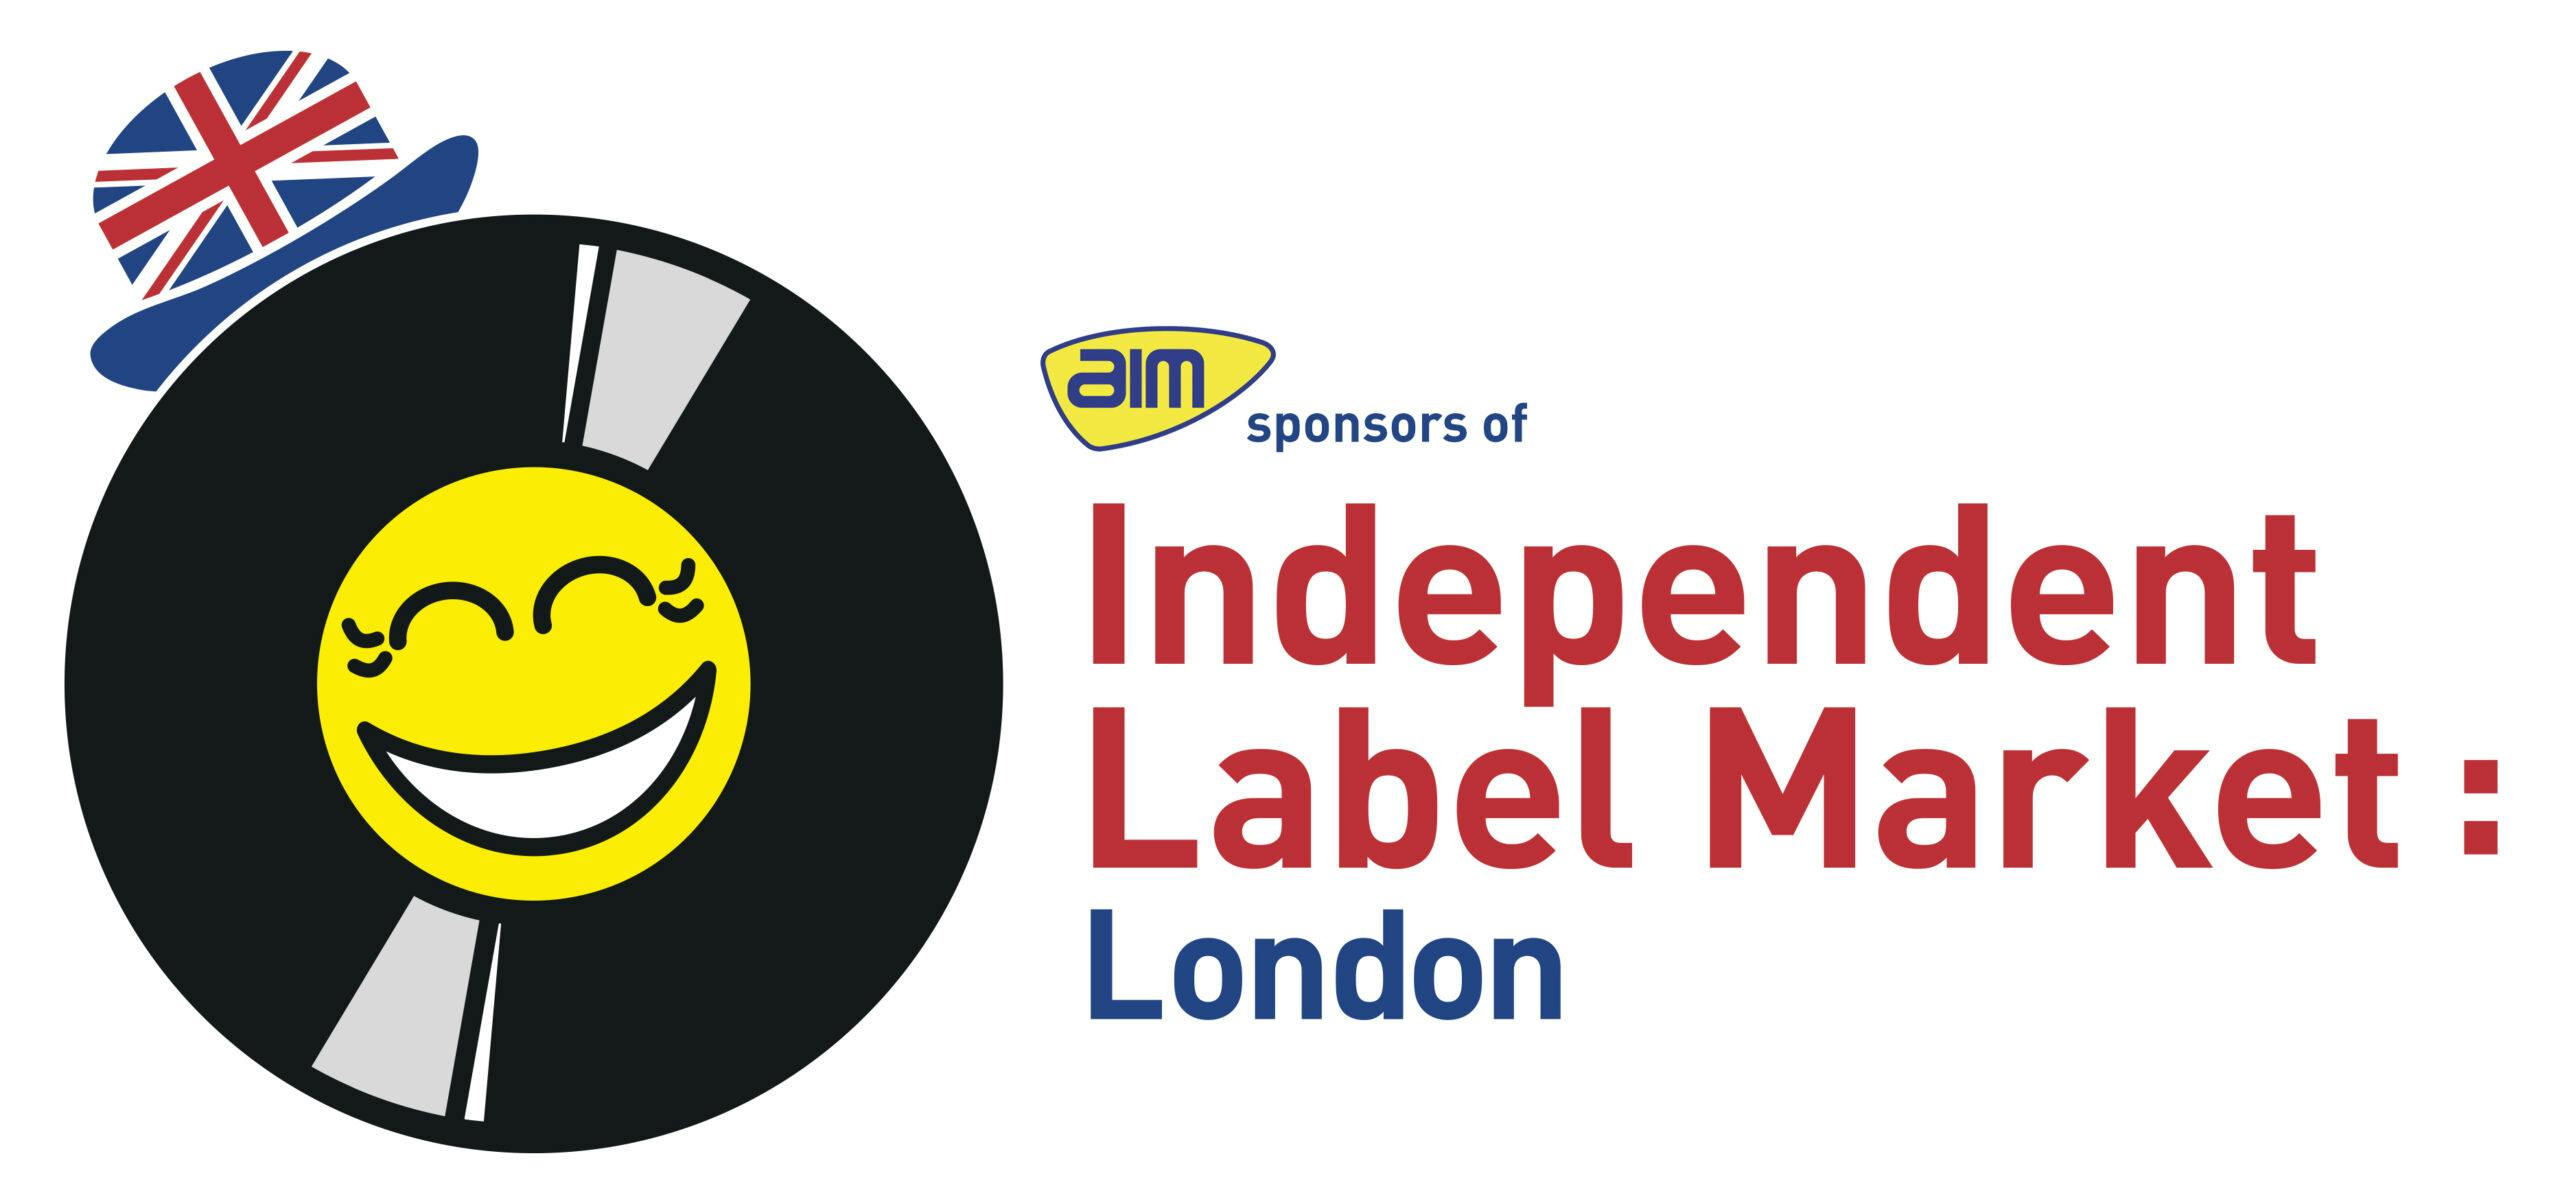 INDEPENDENT LABEL MARKET RETURNS TO LONDON WITH THE LONDON BREWERS’ MARKET FOR ANNUAL SUMMER EVENT